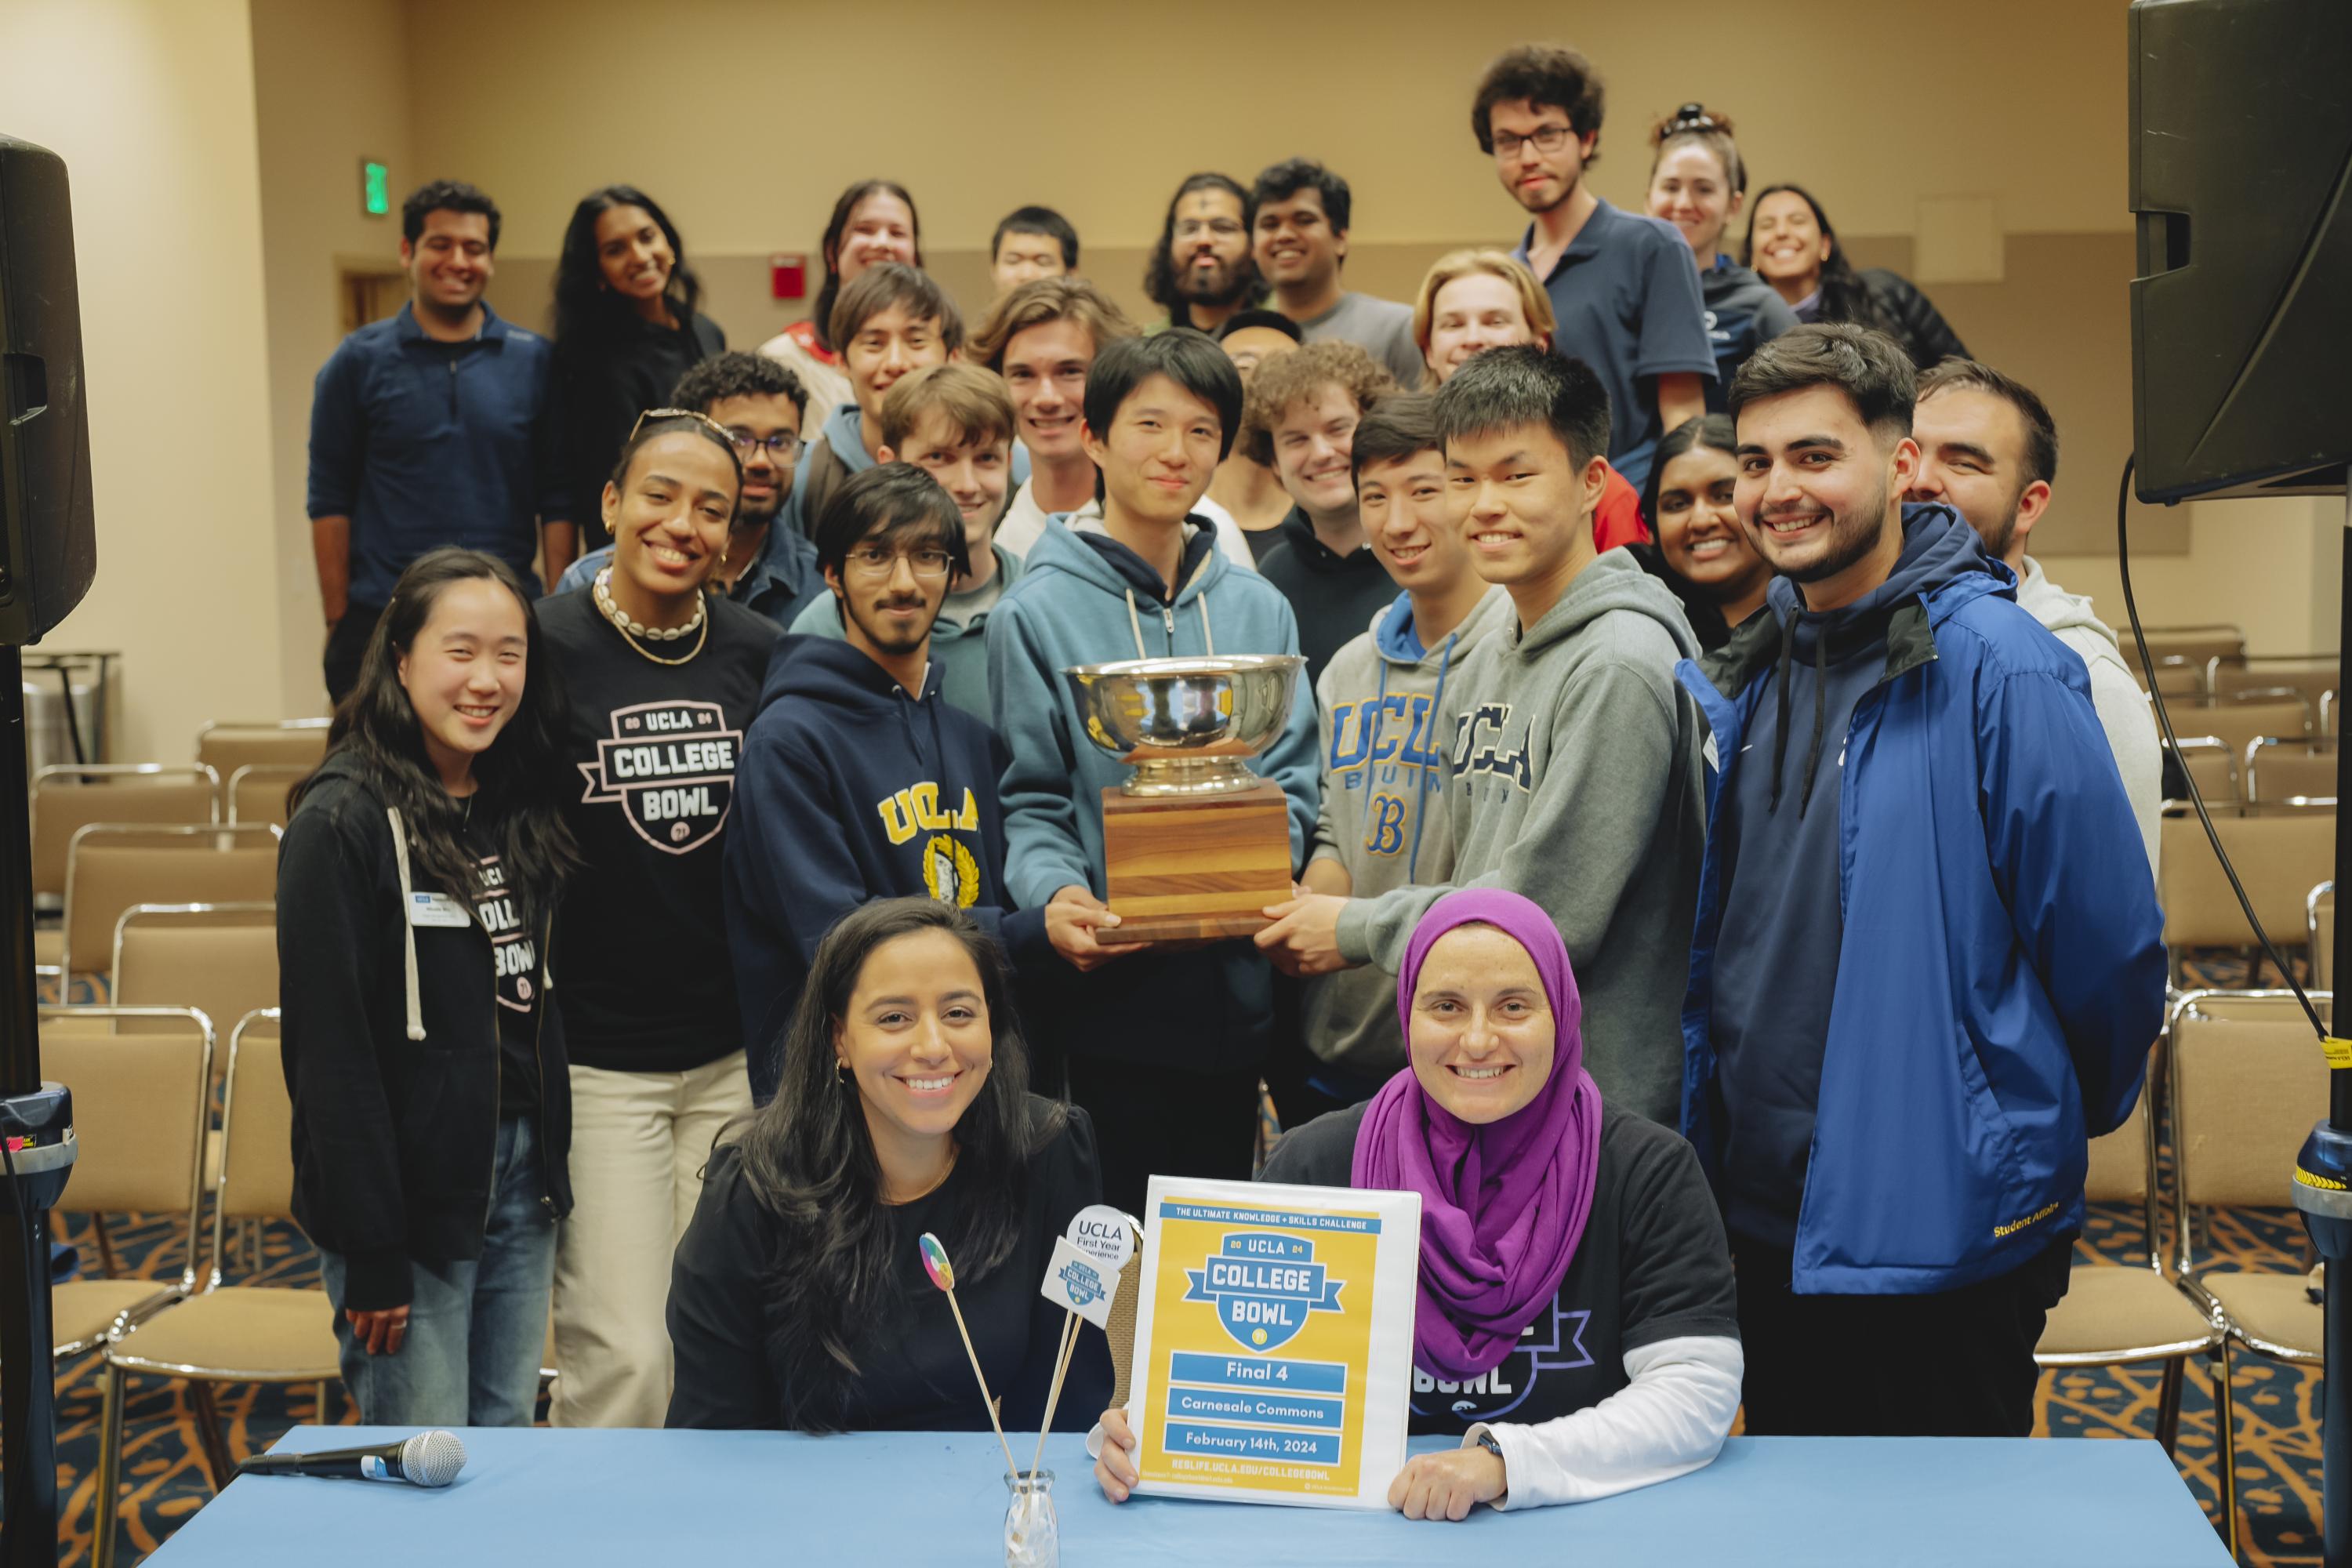 Image of winning team surrounded by judges and students.